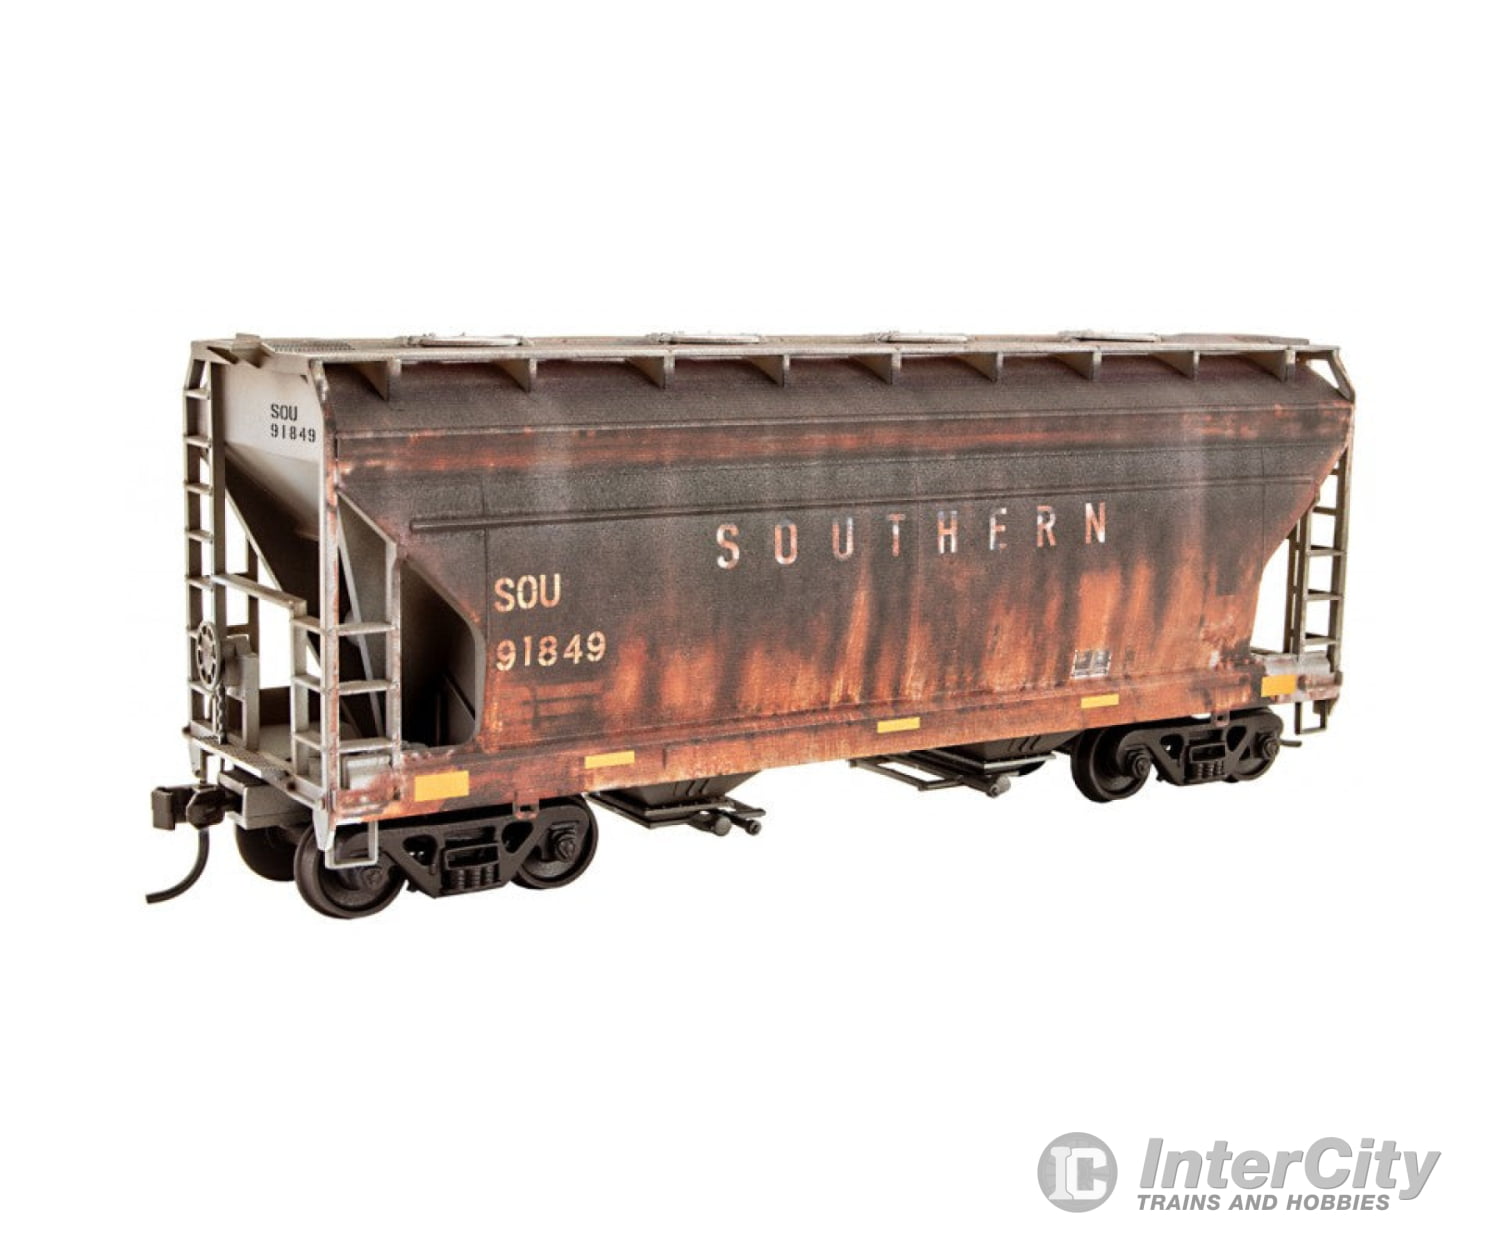 Micro Trains 2200-002 Ho Scale Grit N’ Grime Series - Ns/Ex-Southern 2 Bay Covered Hopper